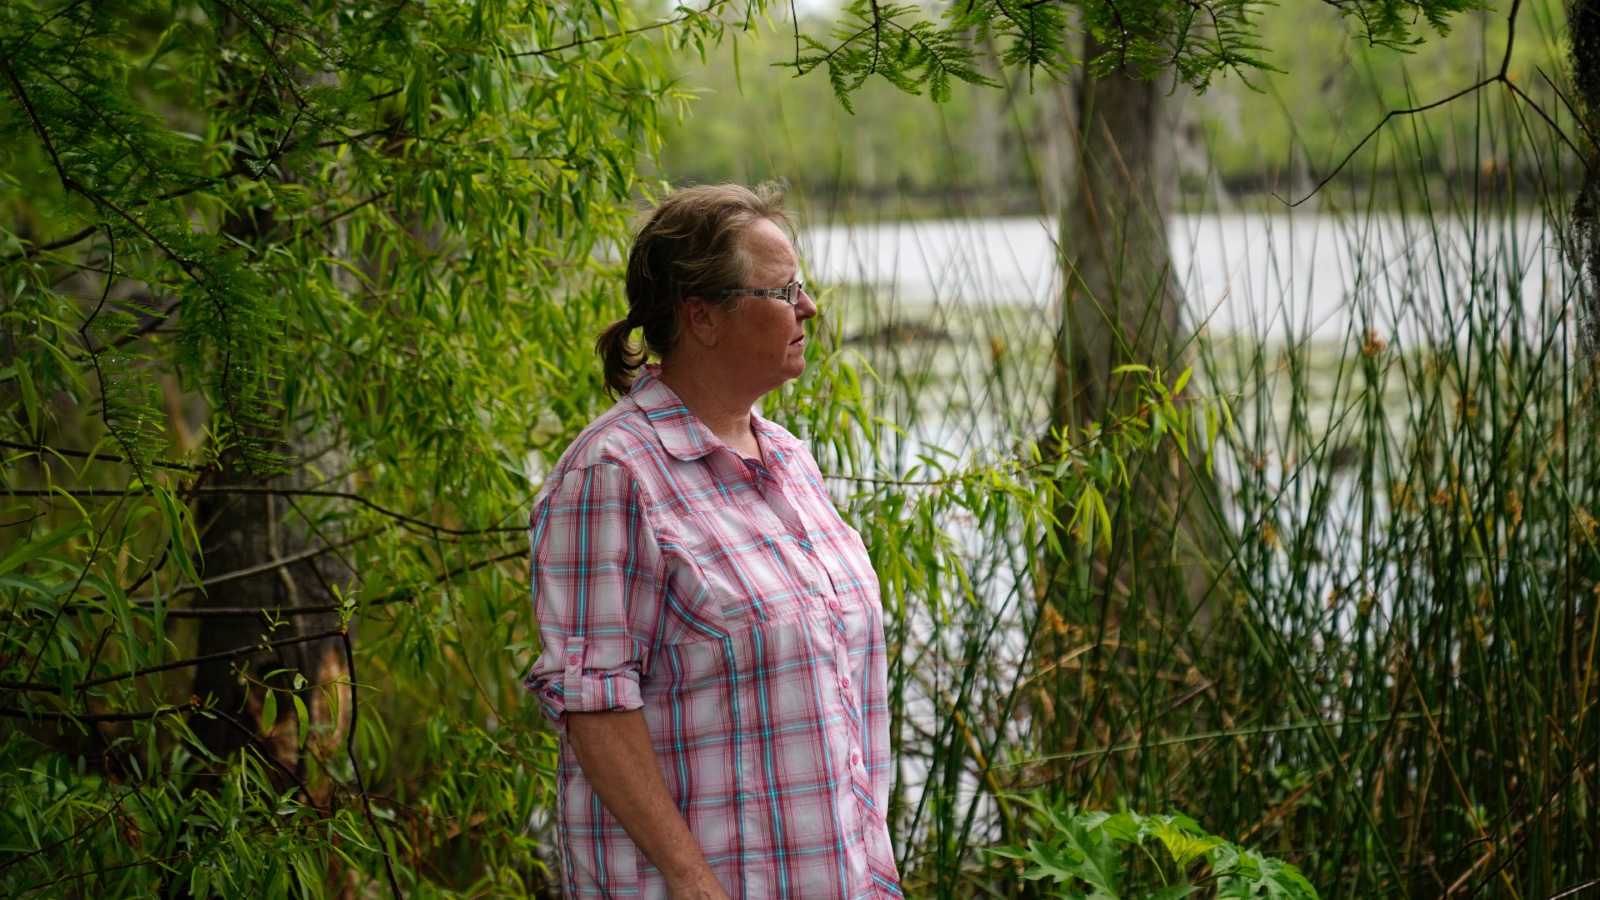 A concerned resident stands by a river near Lake Maurepas in Louisiana, where she worries about the environmental impacts of new carbon capture projects.